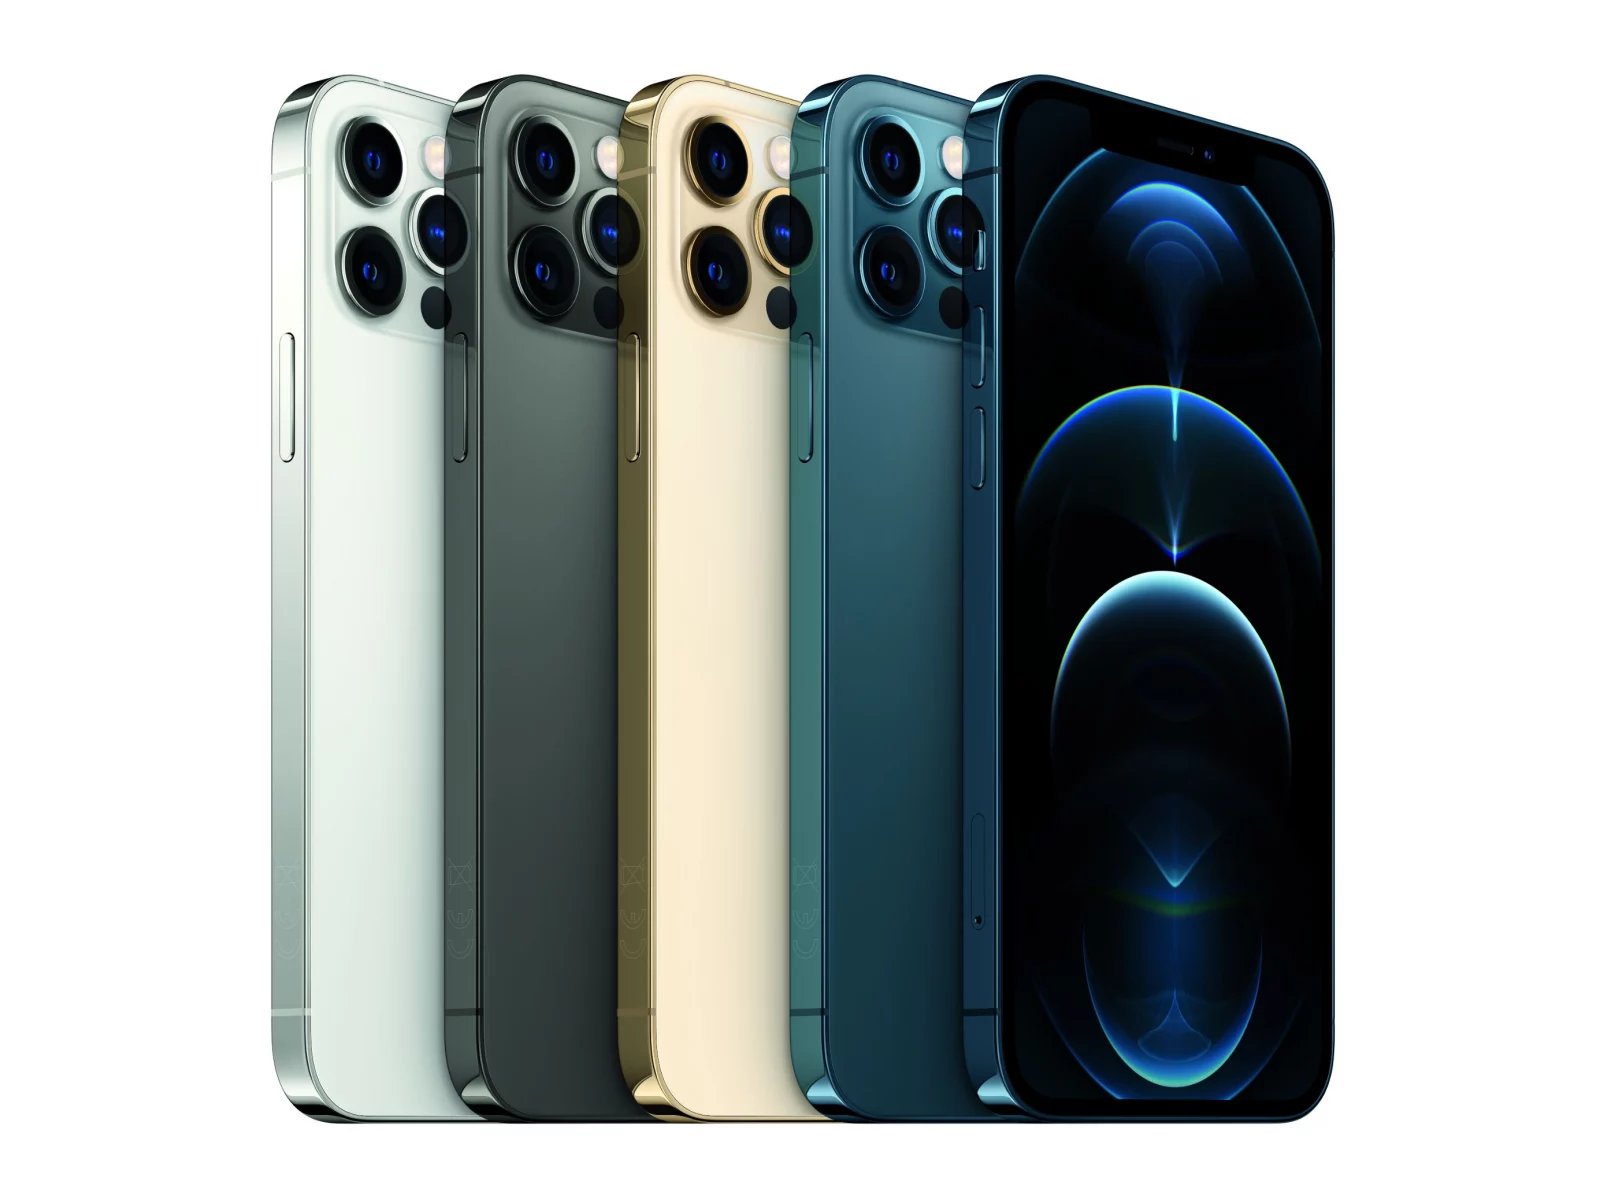 pro max iphone 12 colors